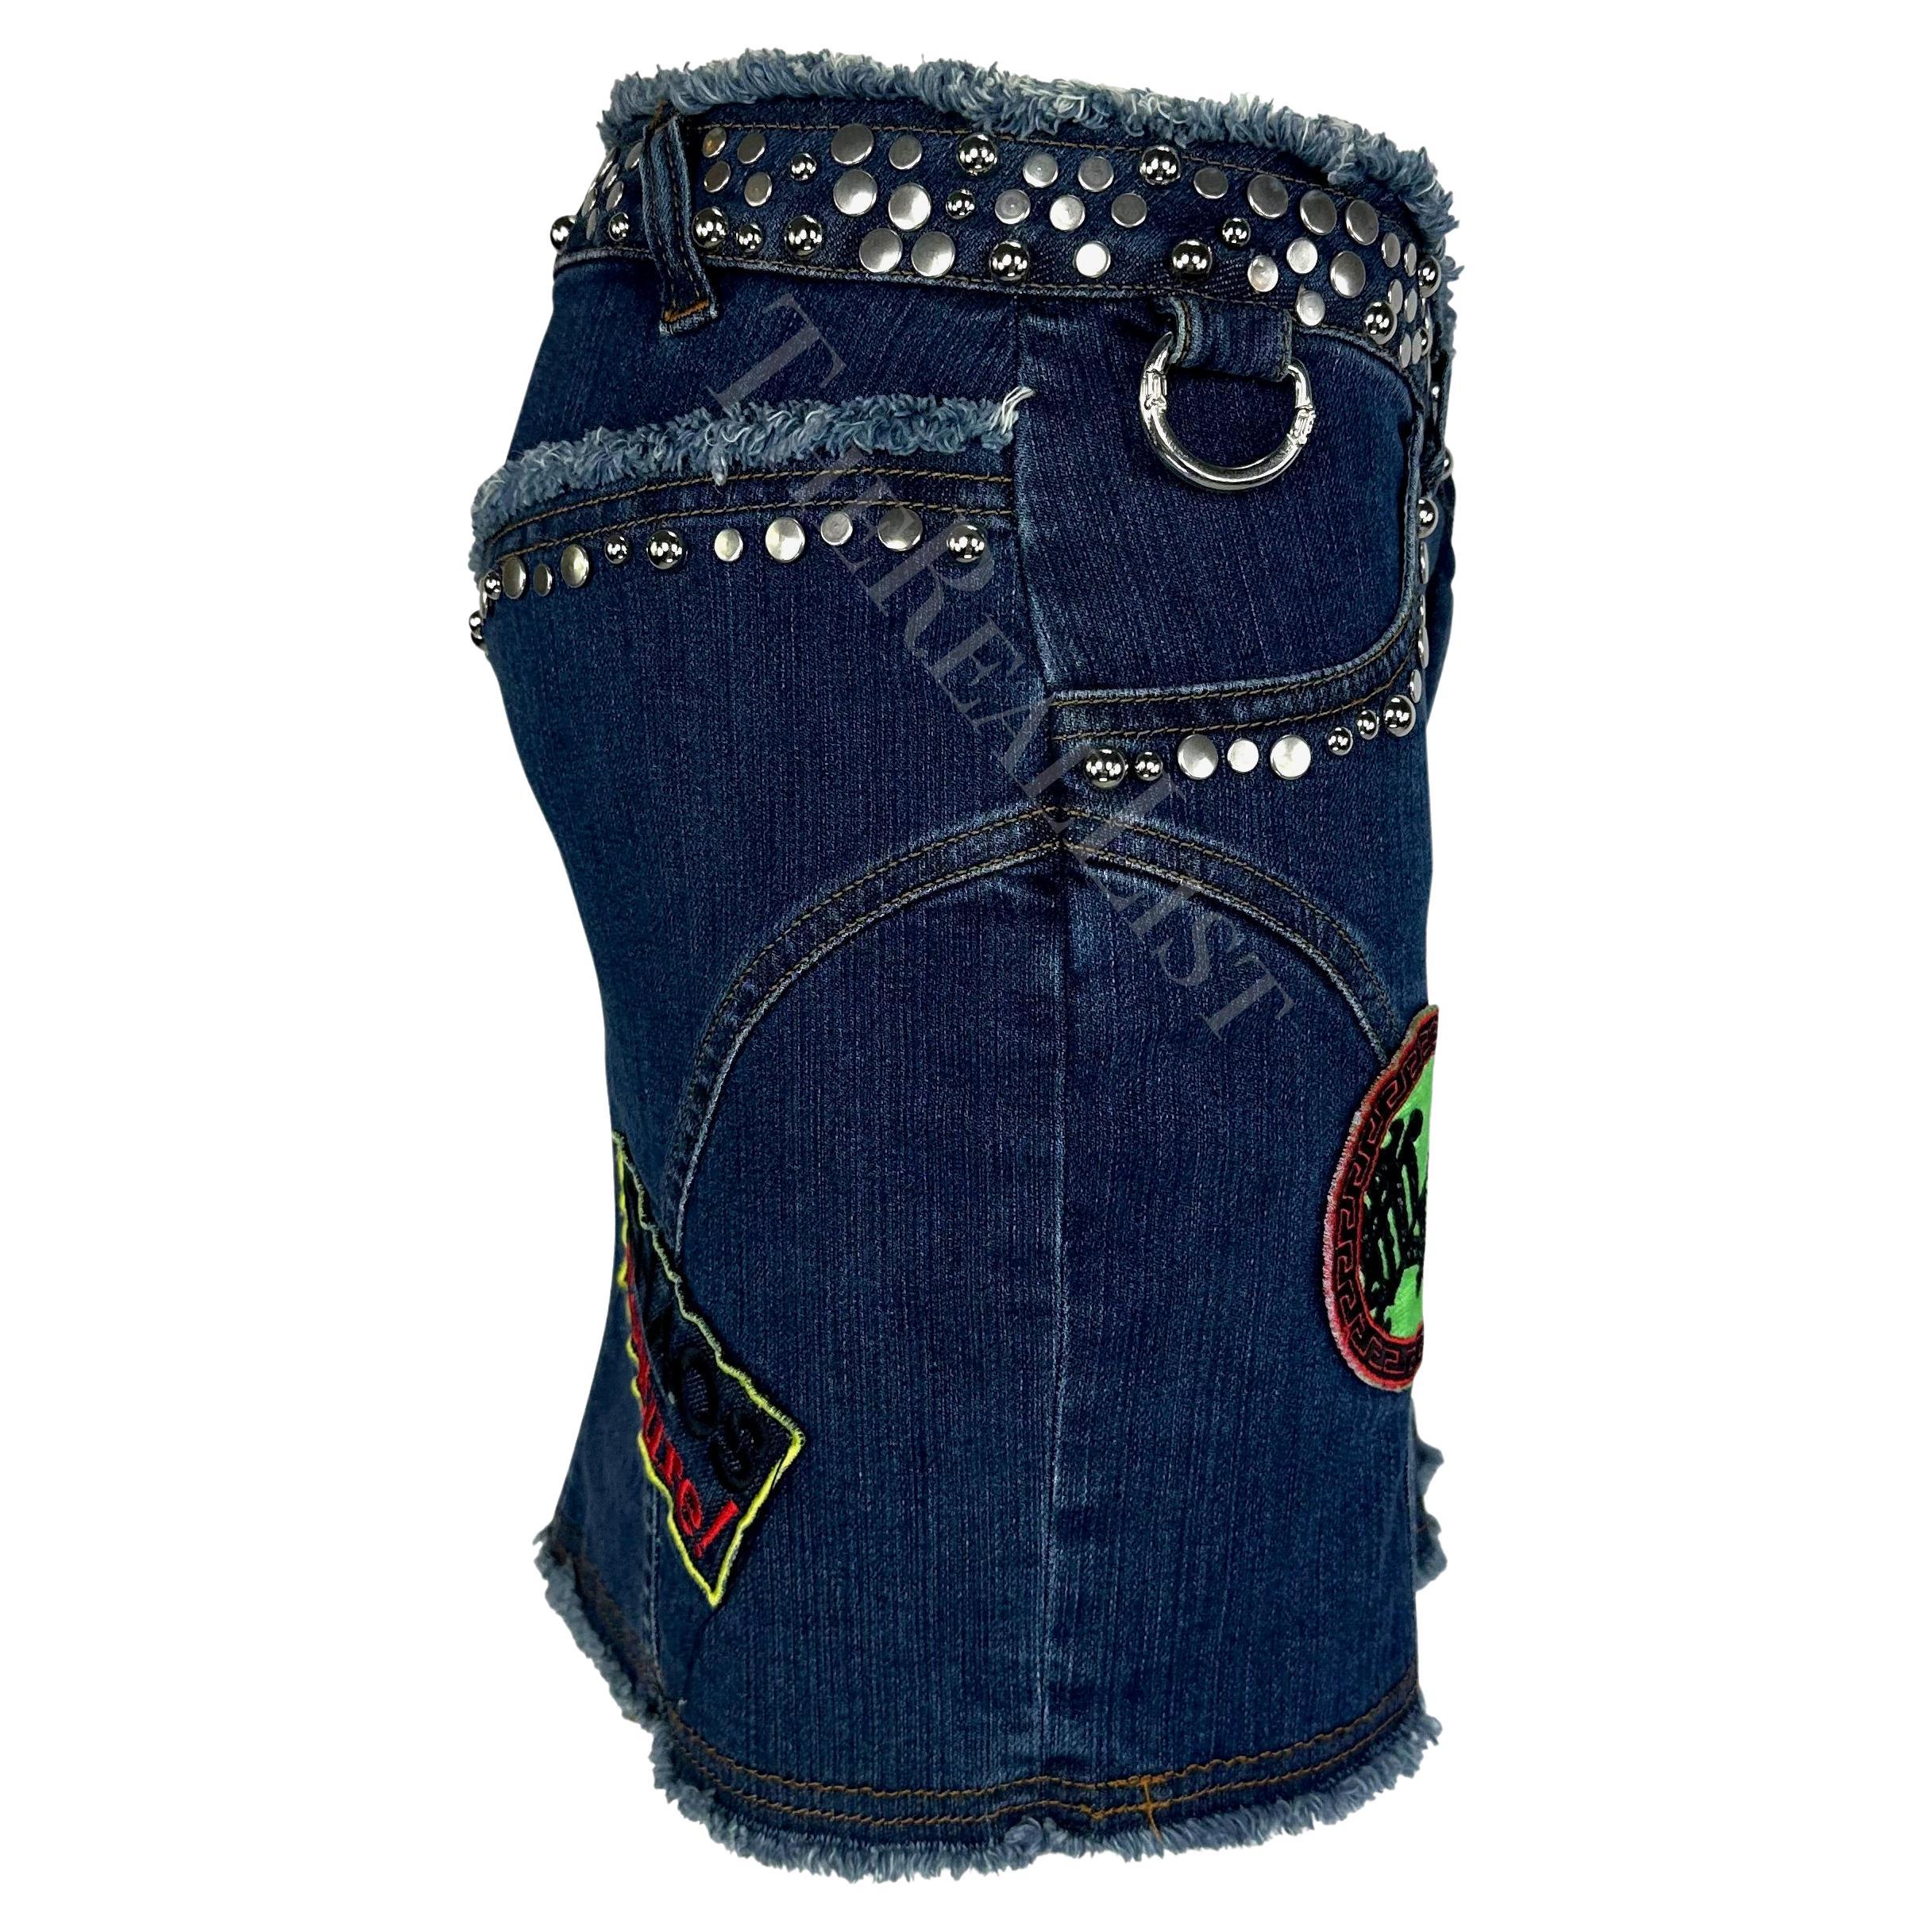 S/S 2005 Versace by Donatella Chaos Couture Studded Denim Patch Vest Skirt Set For Sale 10